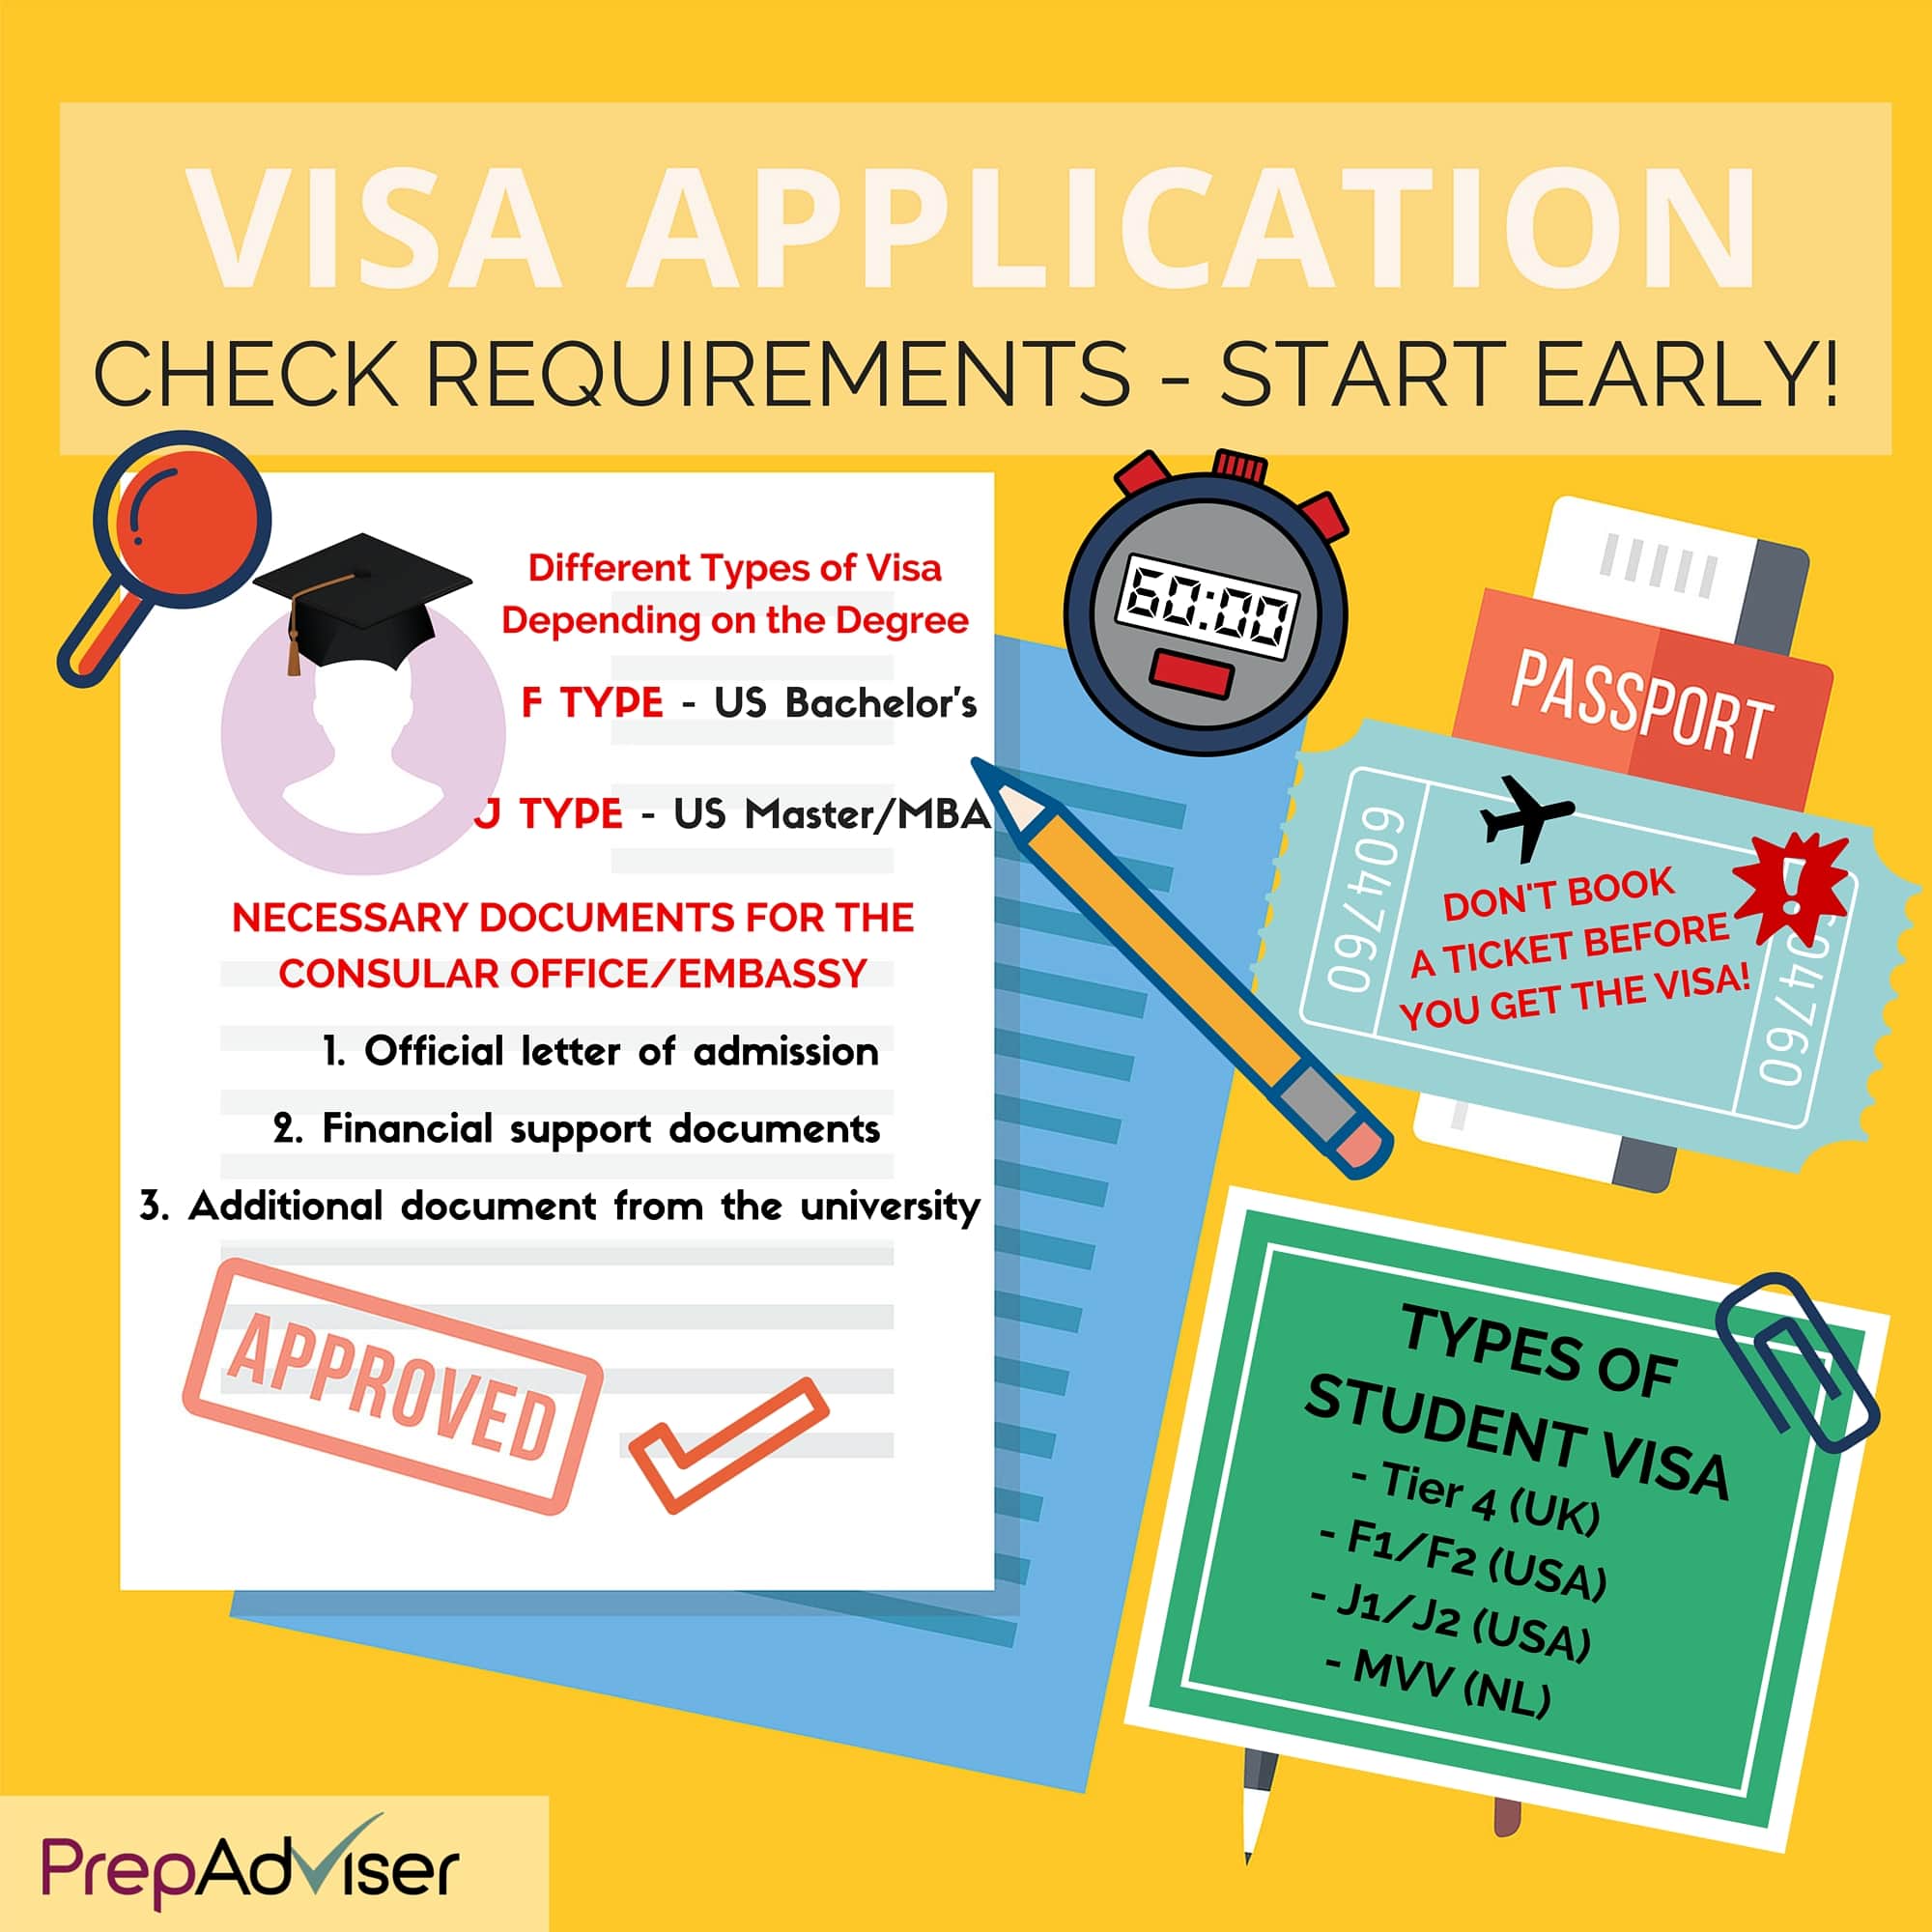 The Student Visa - What You Should Know